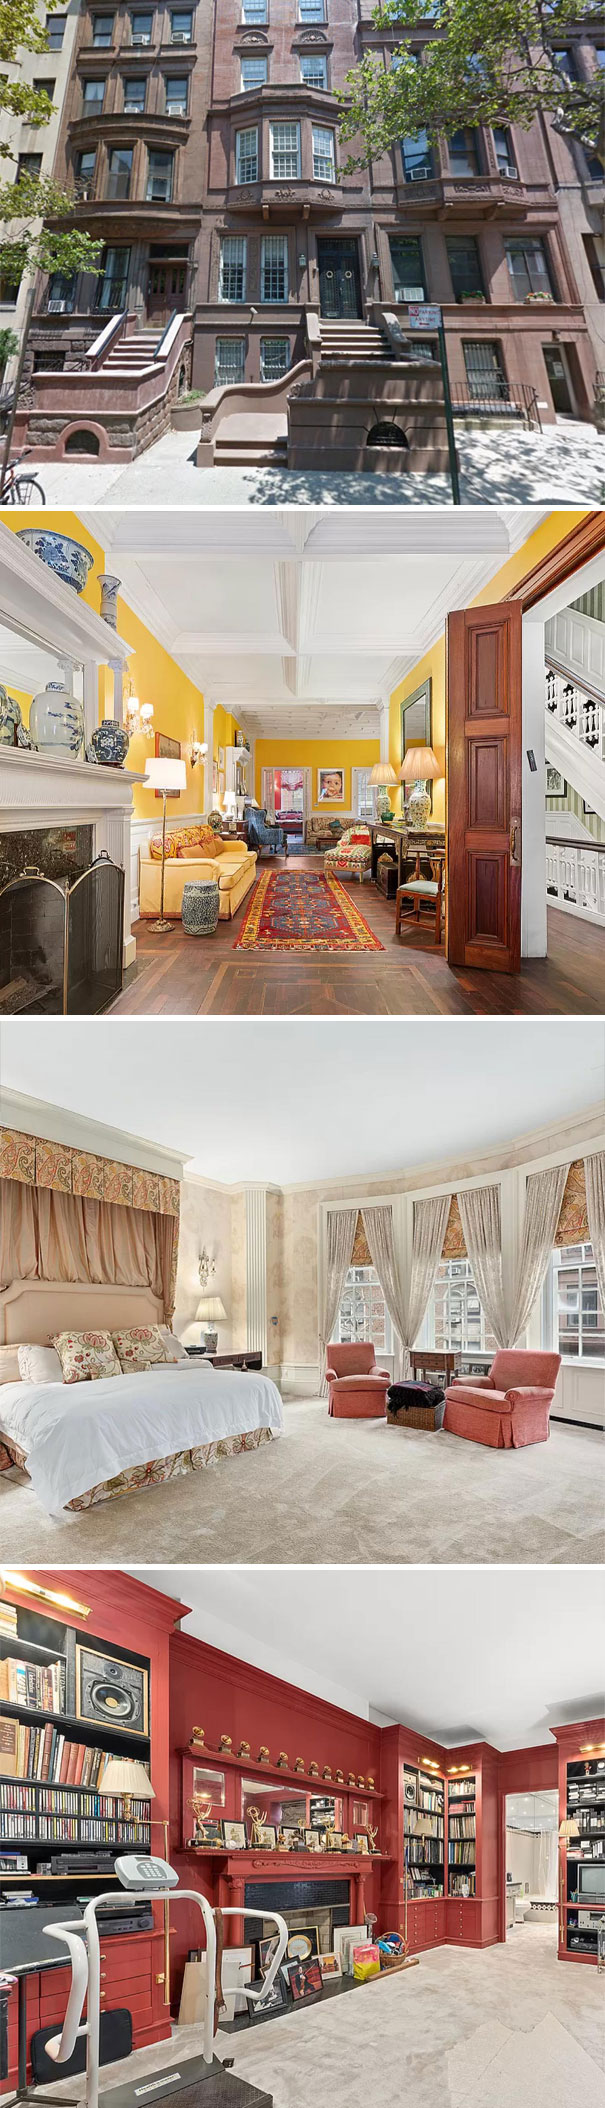 Violinist Itzhak Perlman’s Approx 8k Sq Ft Upper West Side Home Which Was Just Put On The Market For $17.5 Million And It Comes A Rare Surprise In The Basement